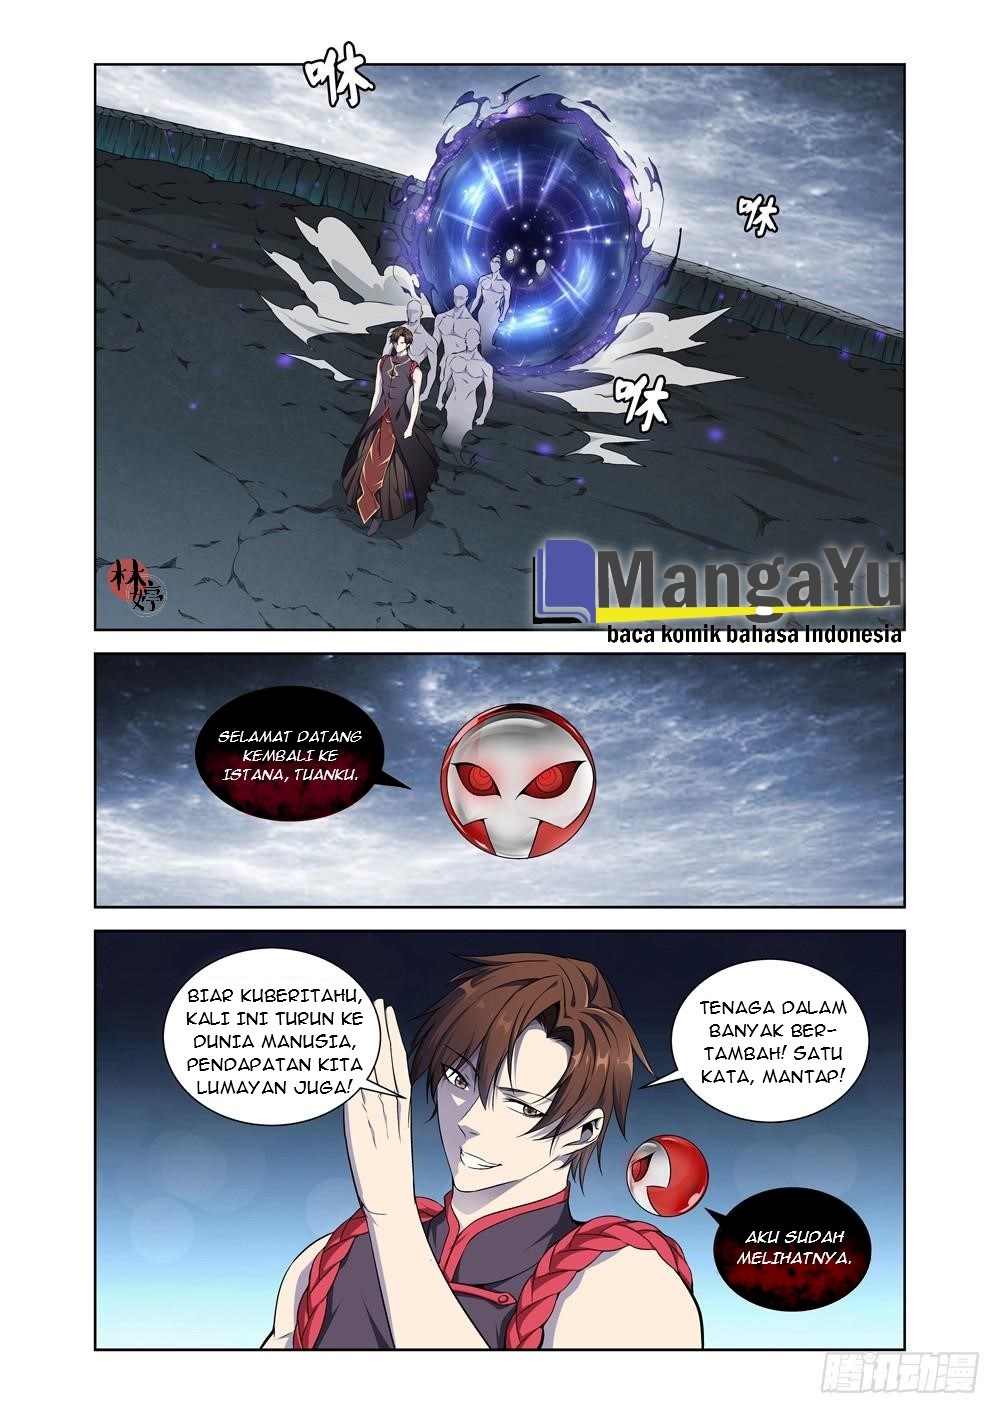 Strongest System Yan Luo Chapter 9